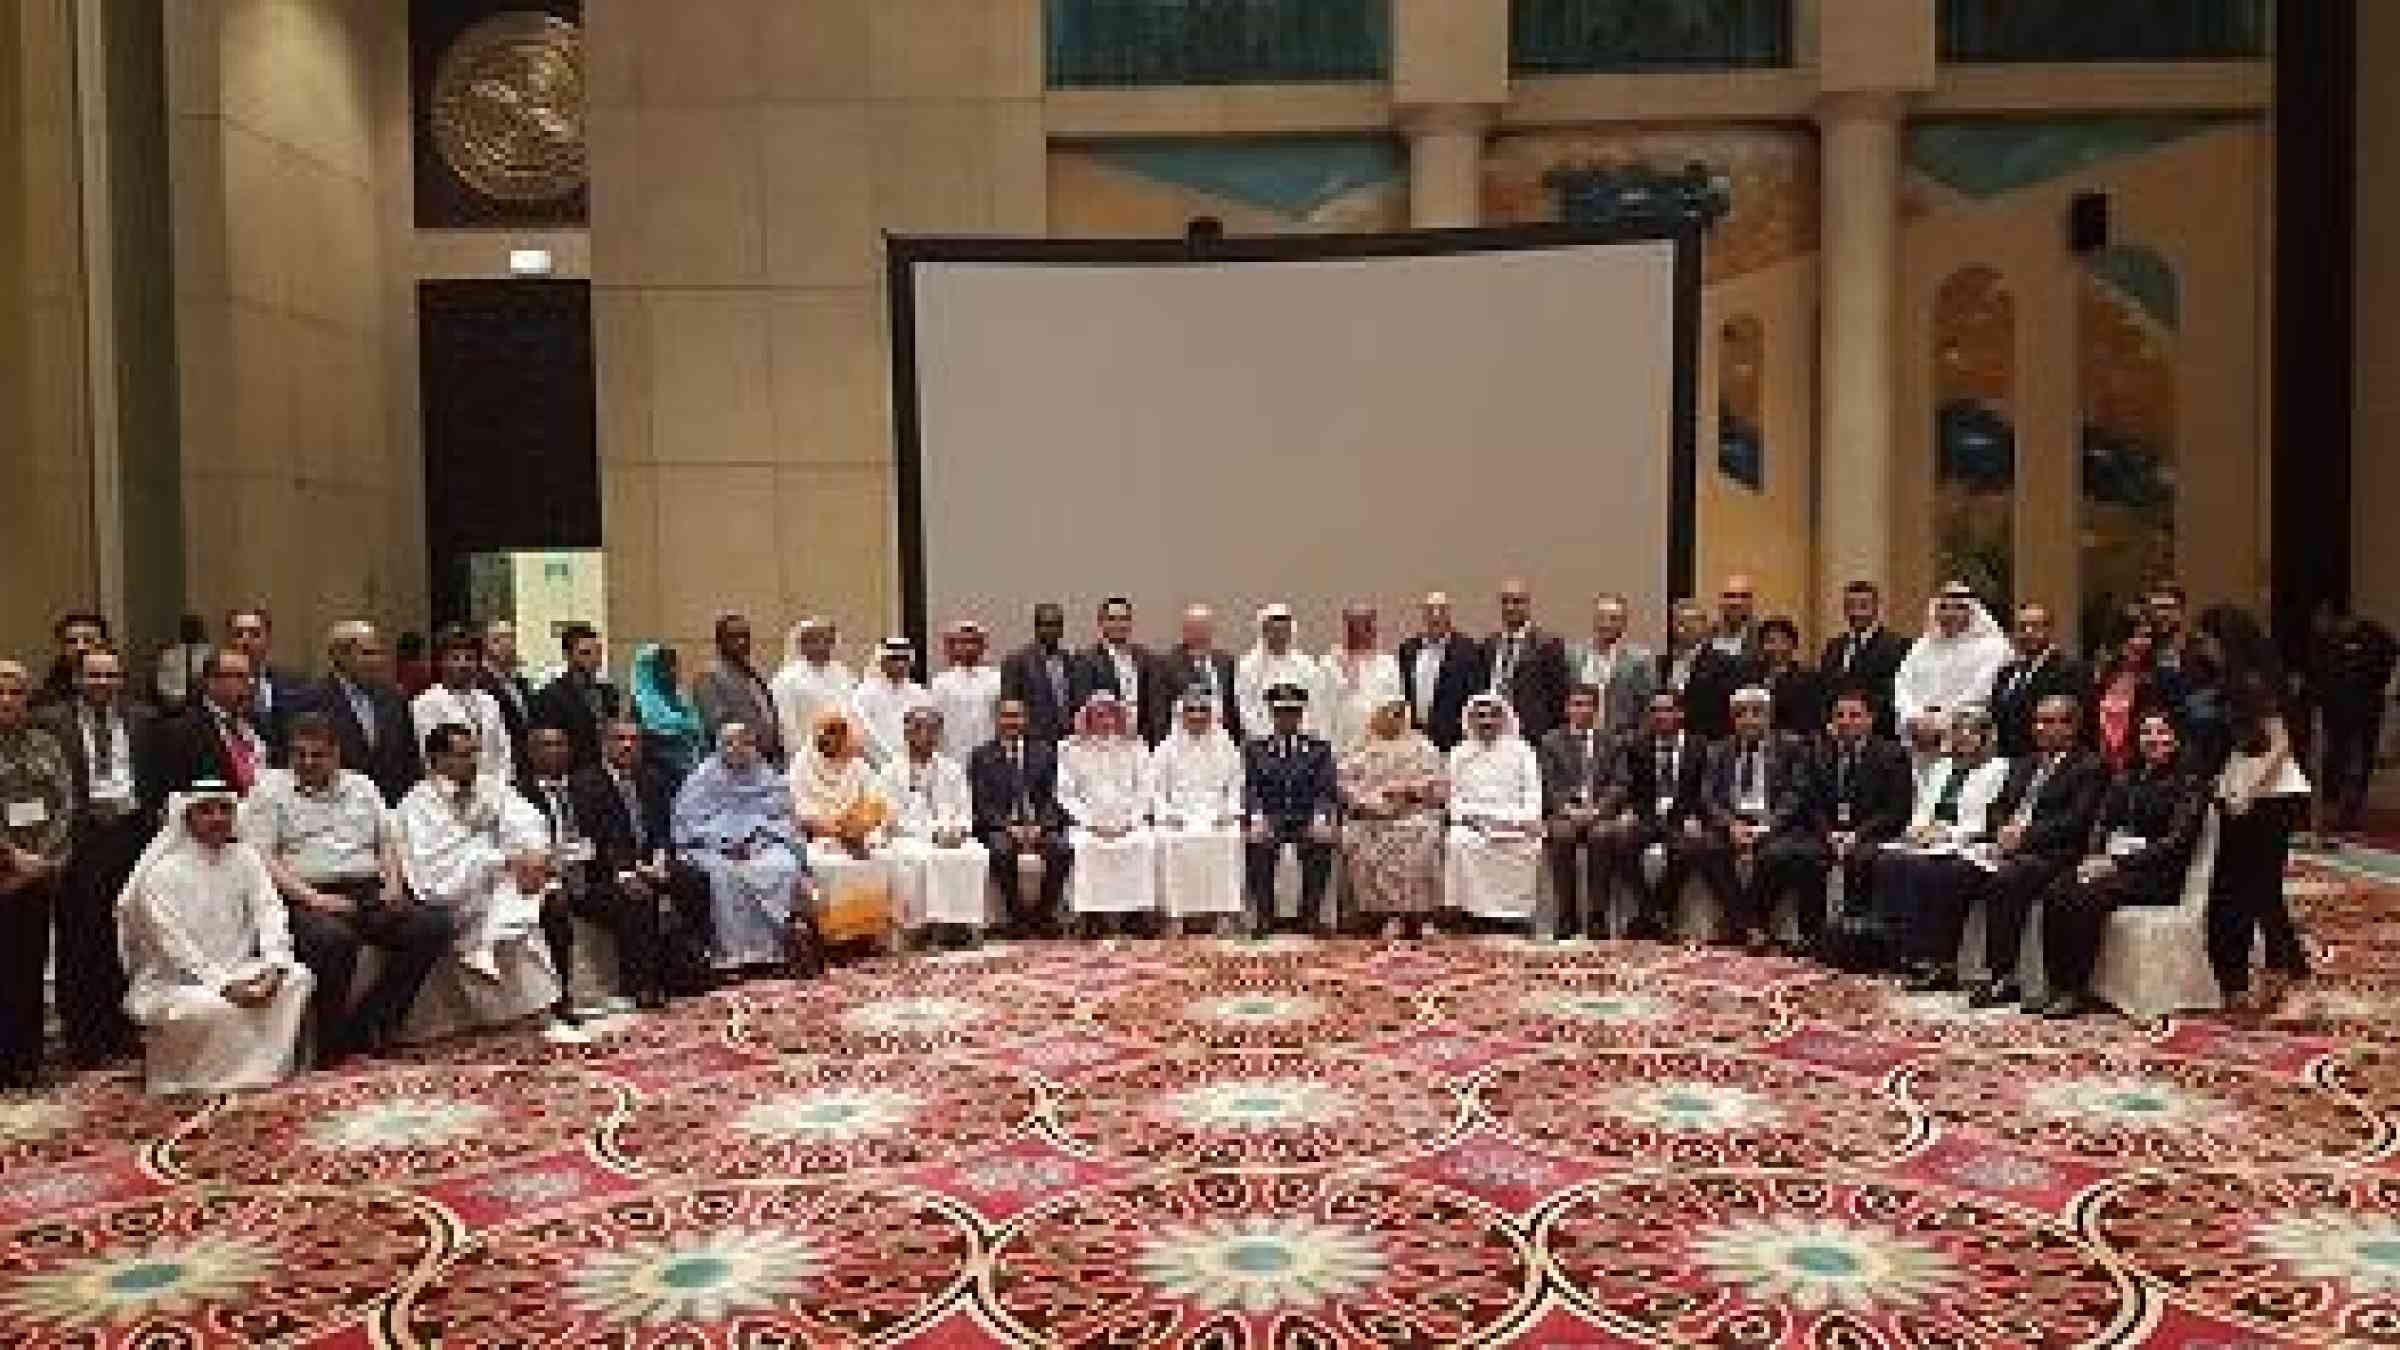 Delegates at the 3rd Arab Preparatory Conference on Disaster Risk Reduction, which was hosted by Qatar and wrapped up on Monday (Photo: UNISDR)